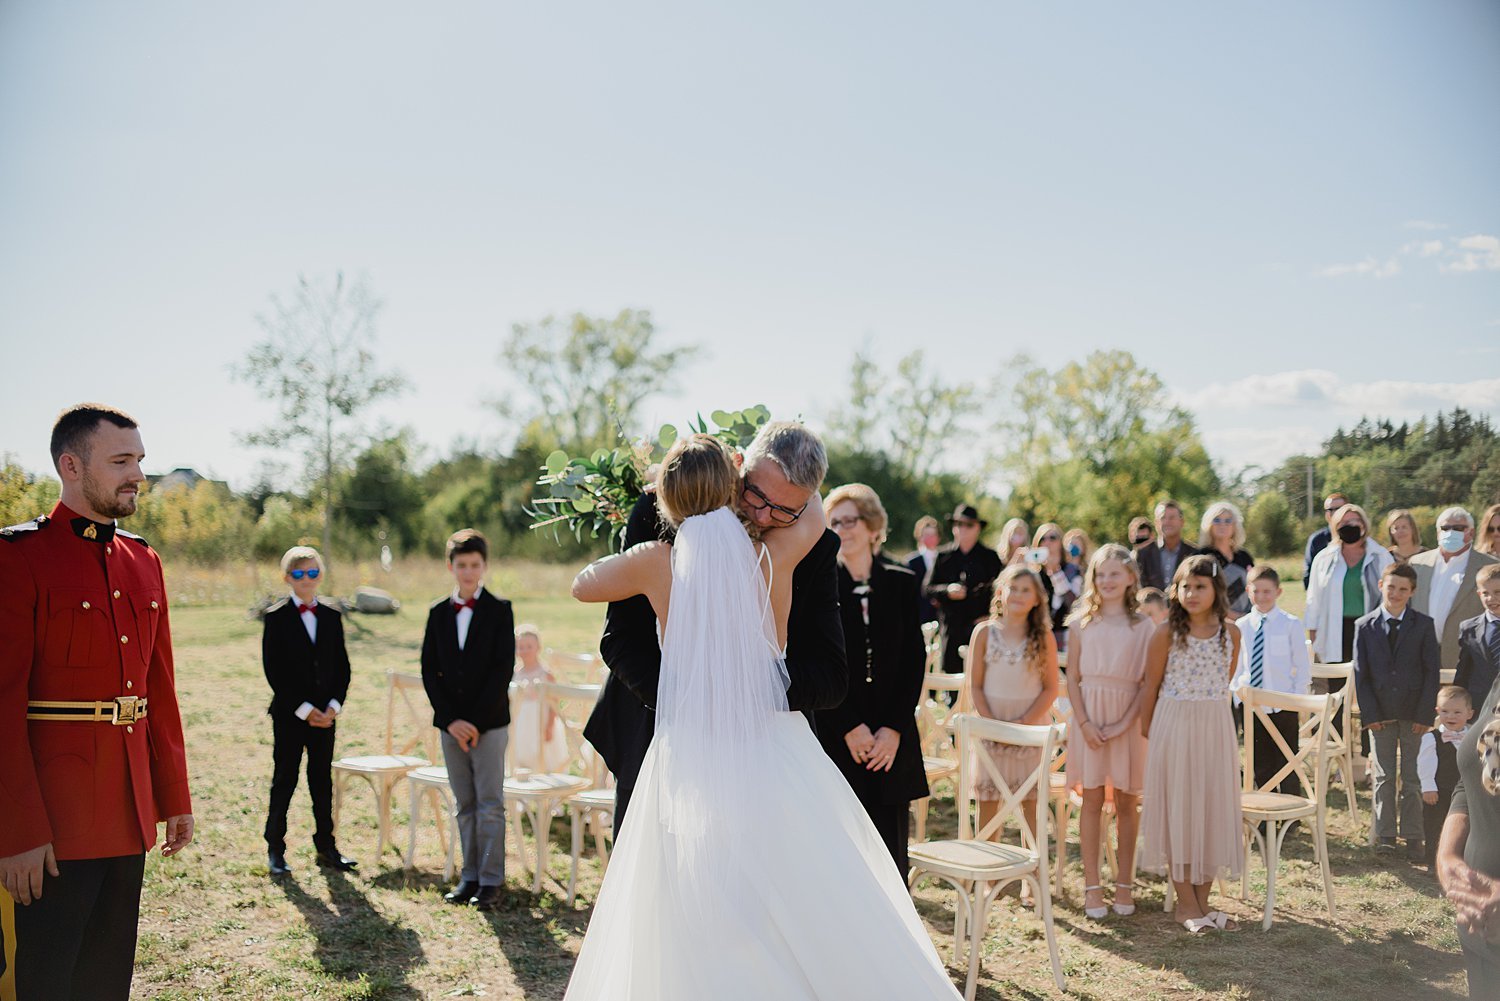 A Royal Canadian Mountie's Intimate Summer Wedding in Prince Edward County | Prince Edward County Wedding Photographer | Holly McMurter Photographs_0060.jpg